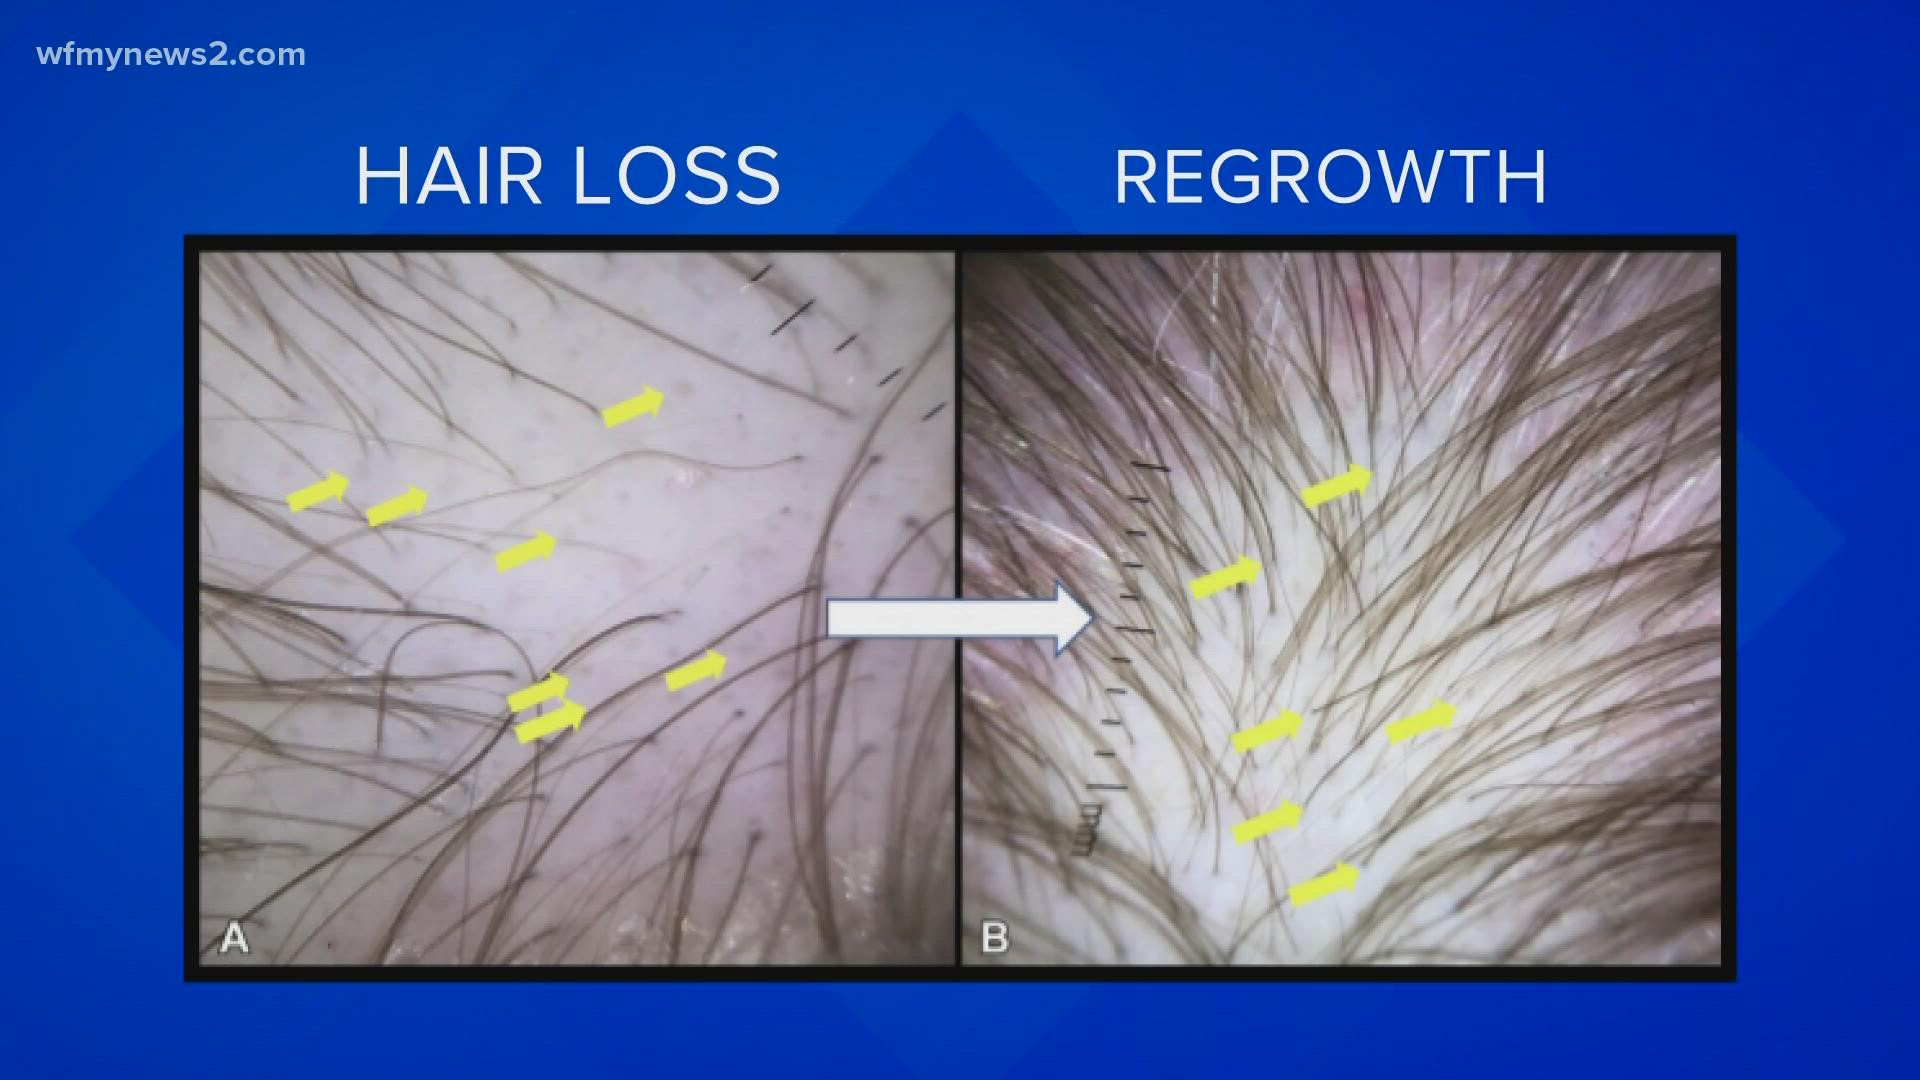 Research shows more than two-thirds of people hospitalized with COVID-19 have at least one lingering symptom like hair loss.